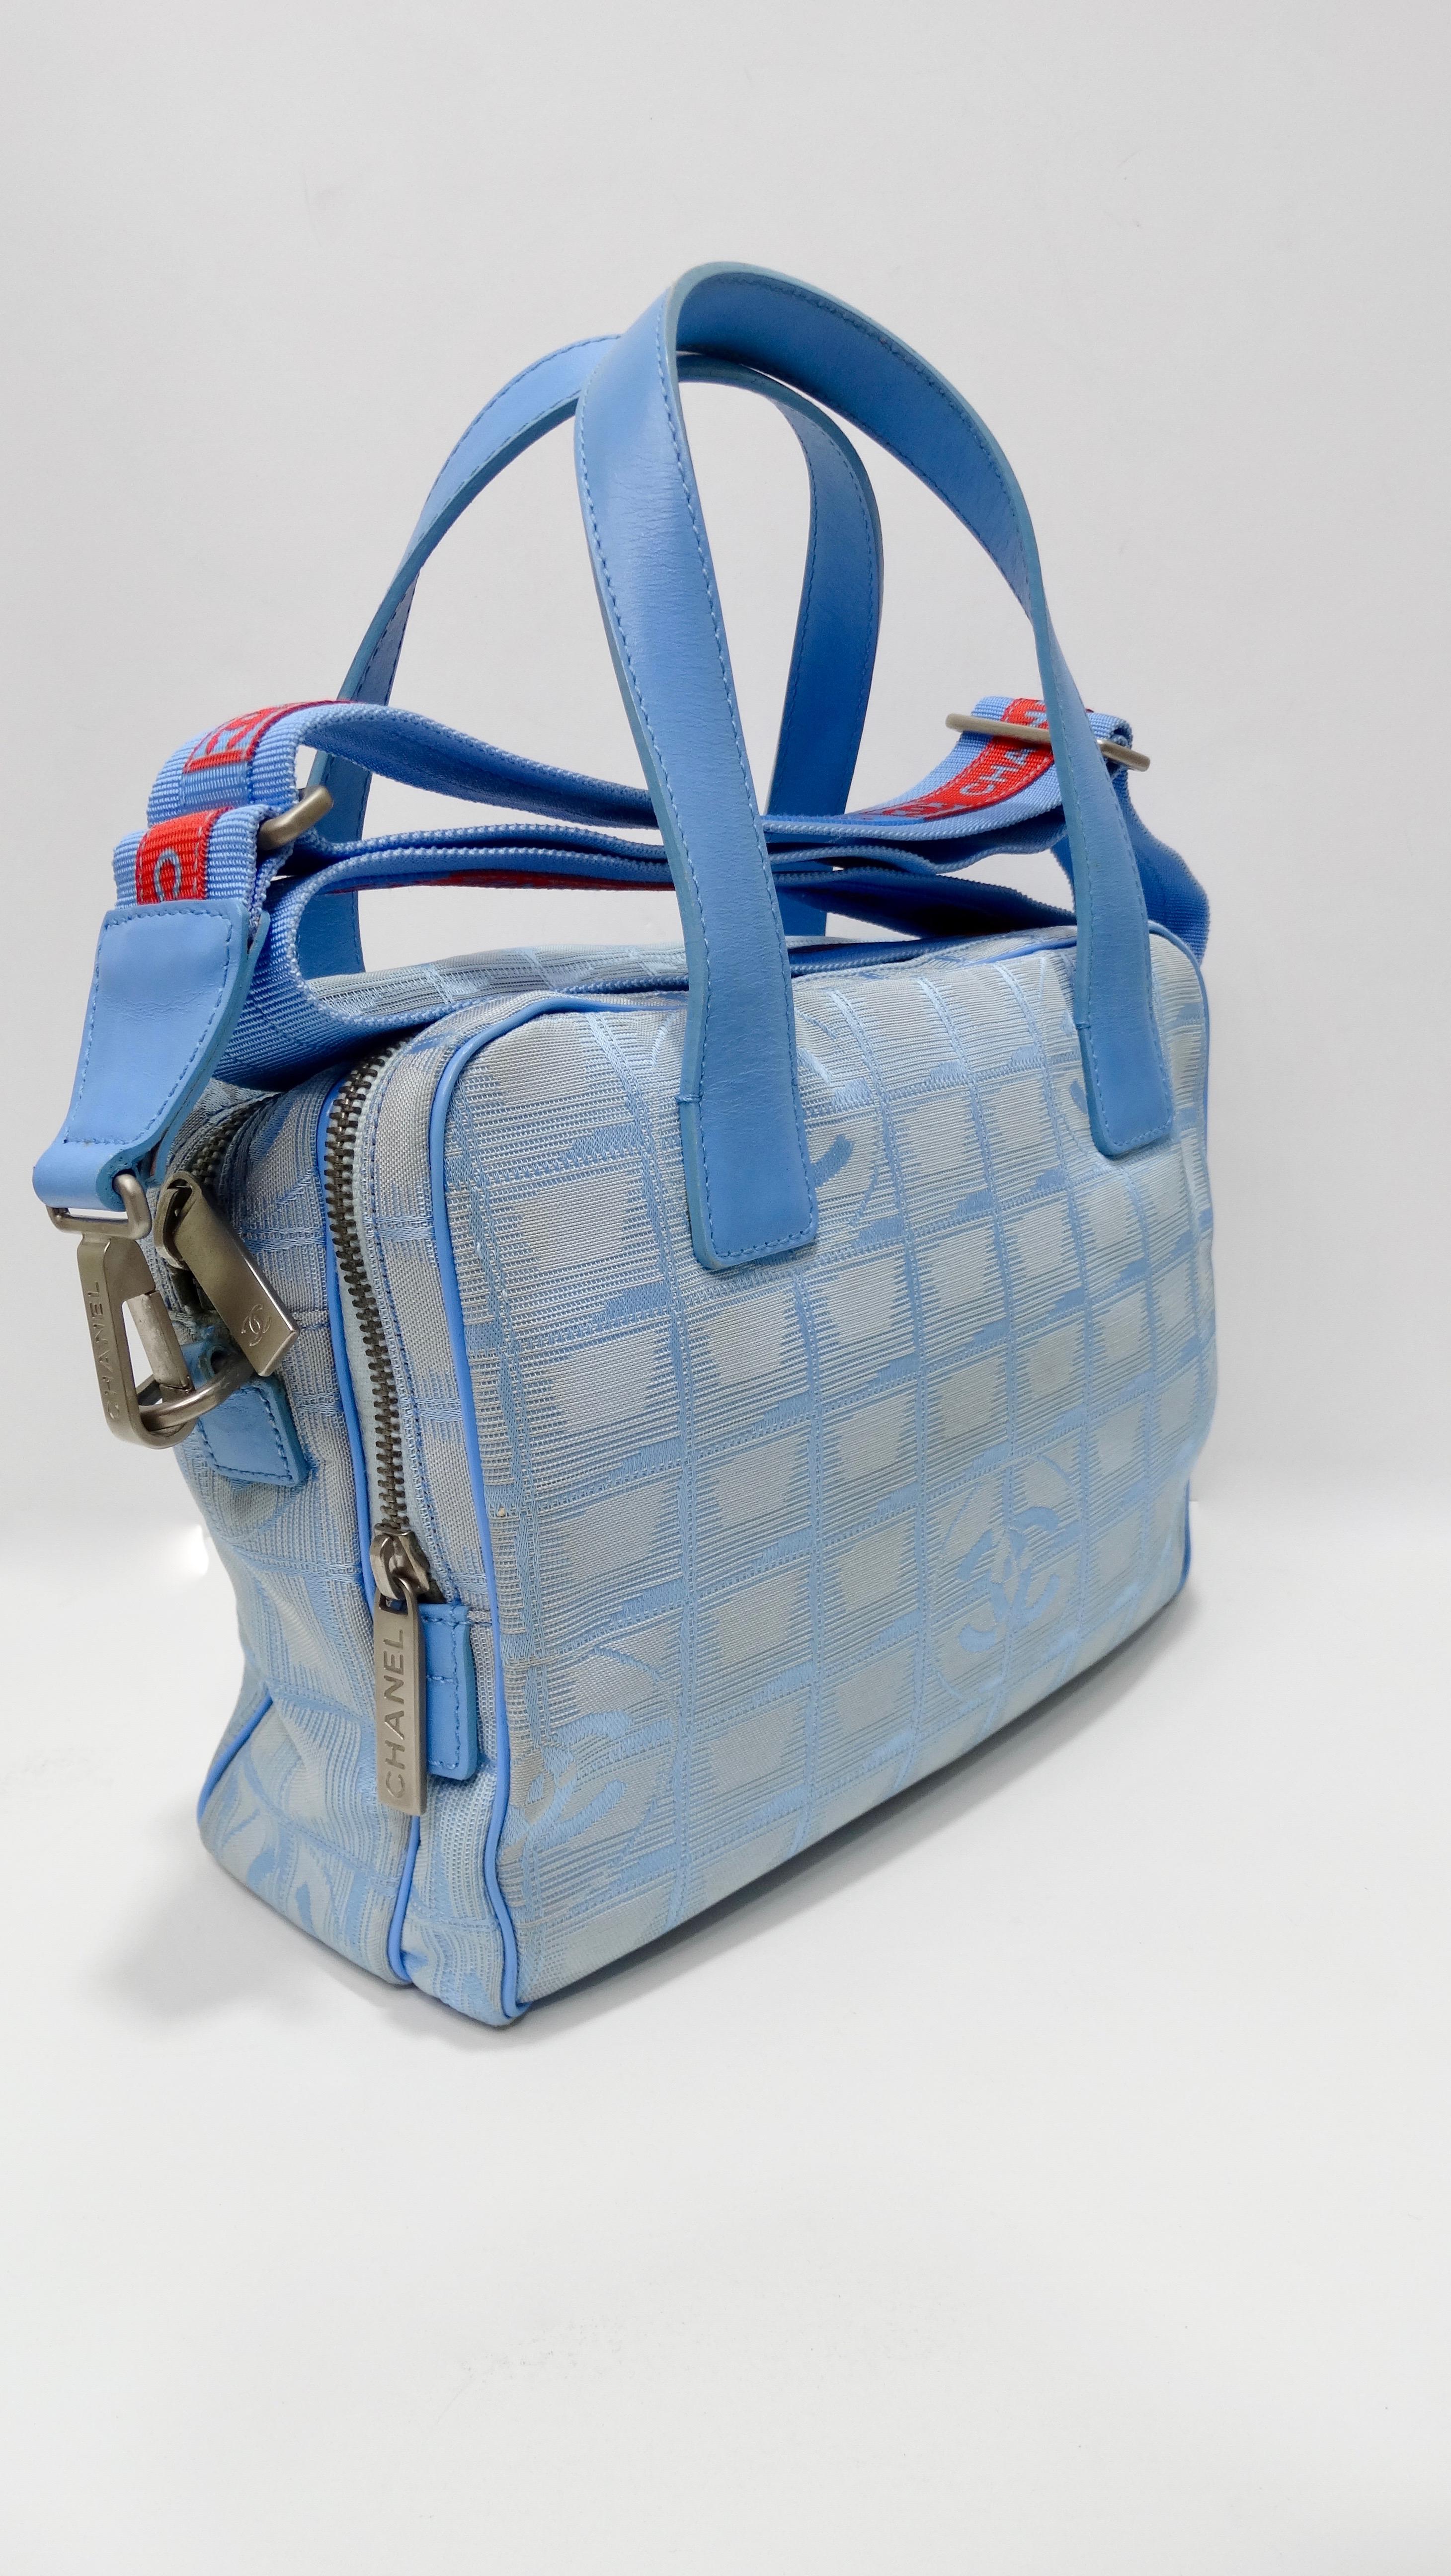 Calling all the Chanel lovers! Circa 2001-2003, this travel line Chanel mini tote is crafted from two-tone blue canvas and features a grid pattern with CC's. Includes blue leather piping, silver hardware, dual blue leather top handles, two top